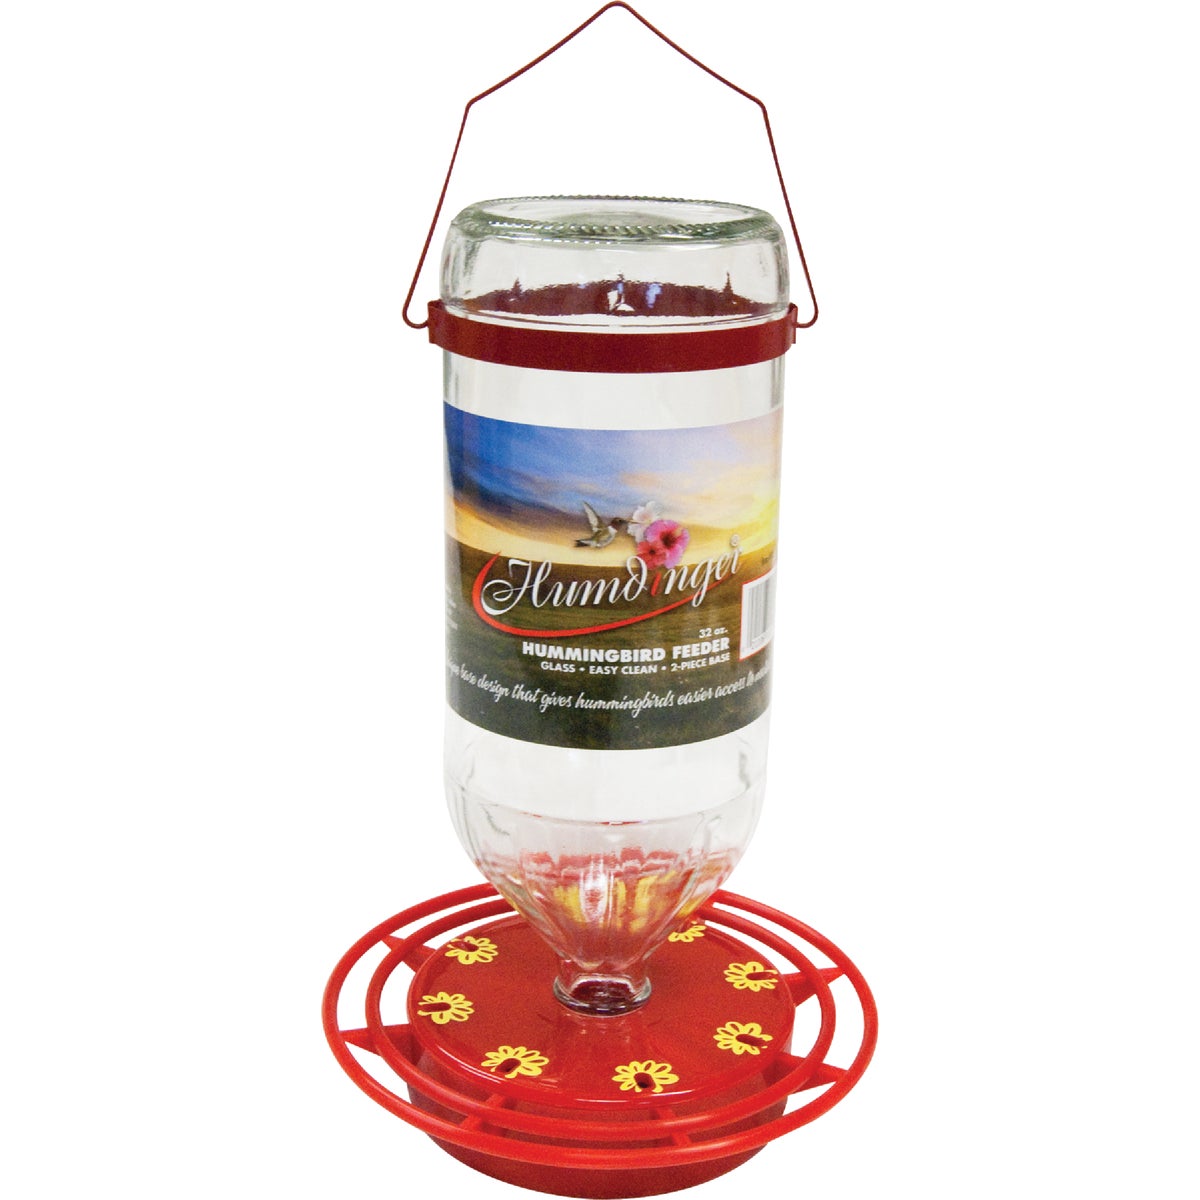 Item 760157, Easy-fill, 32 Oz. glass container.